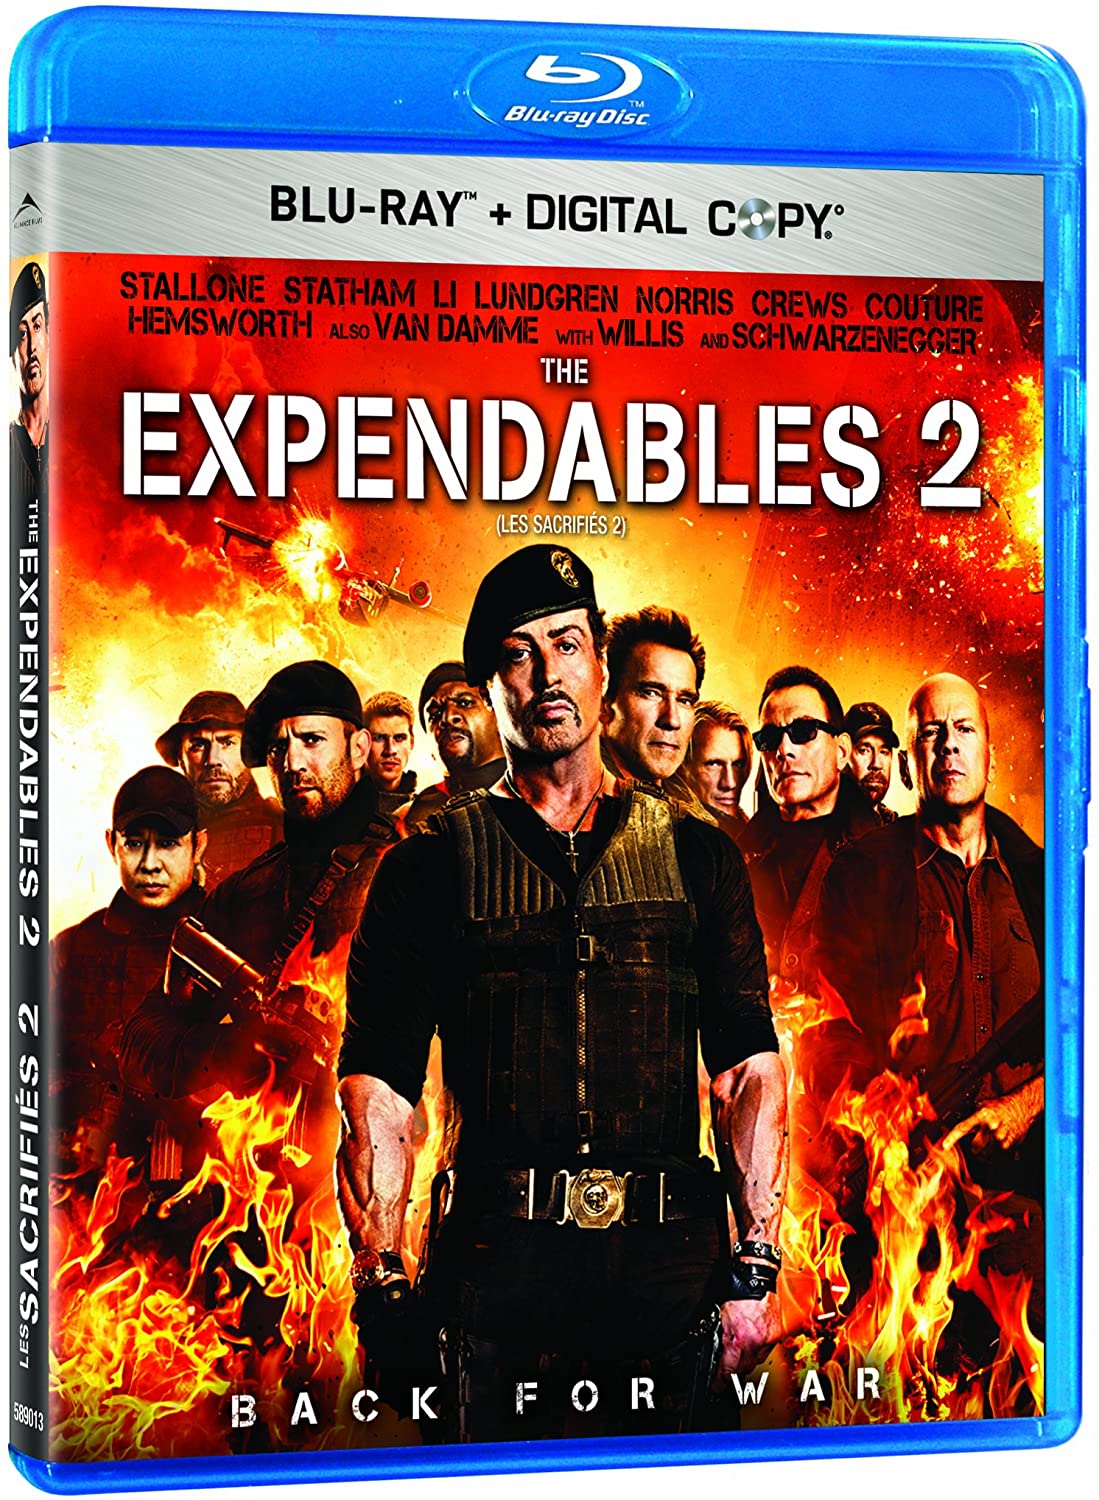 The Expendables 2 (Blu-ray + Digital Copy )